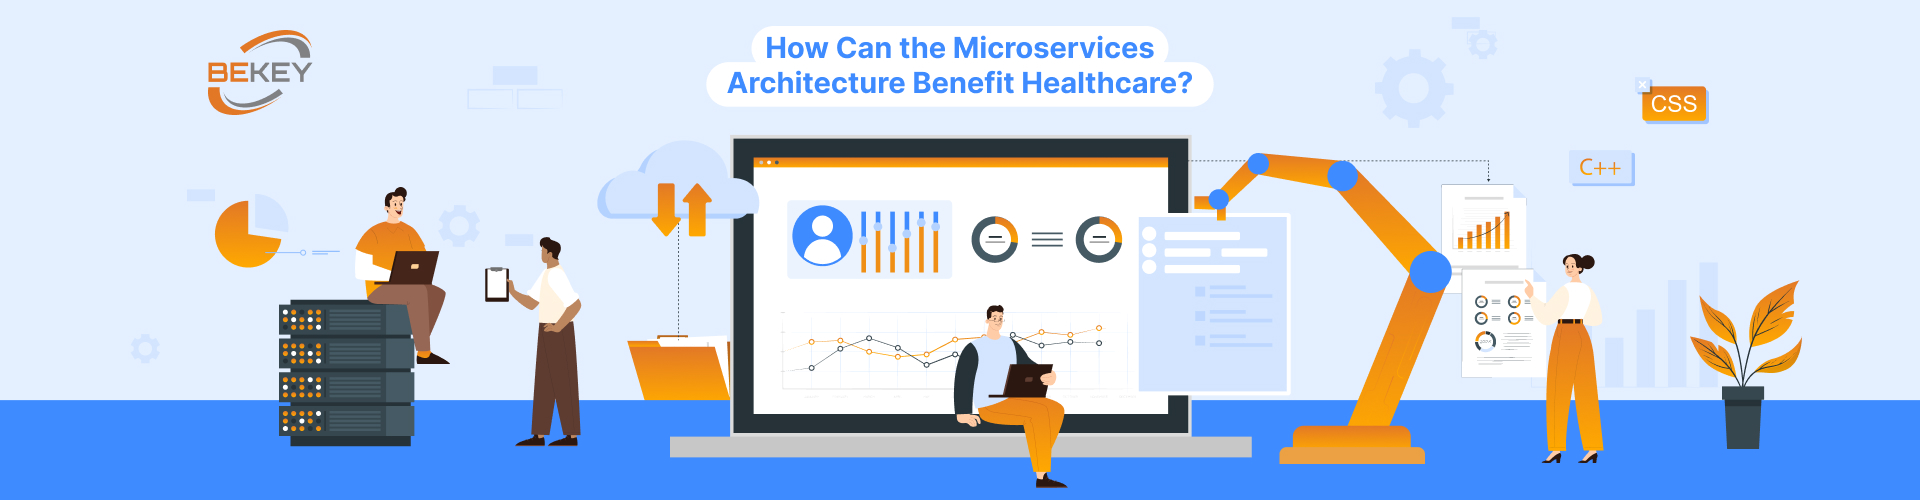 How Can the Microservices Architecture Benefit Healthcare? - image